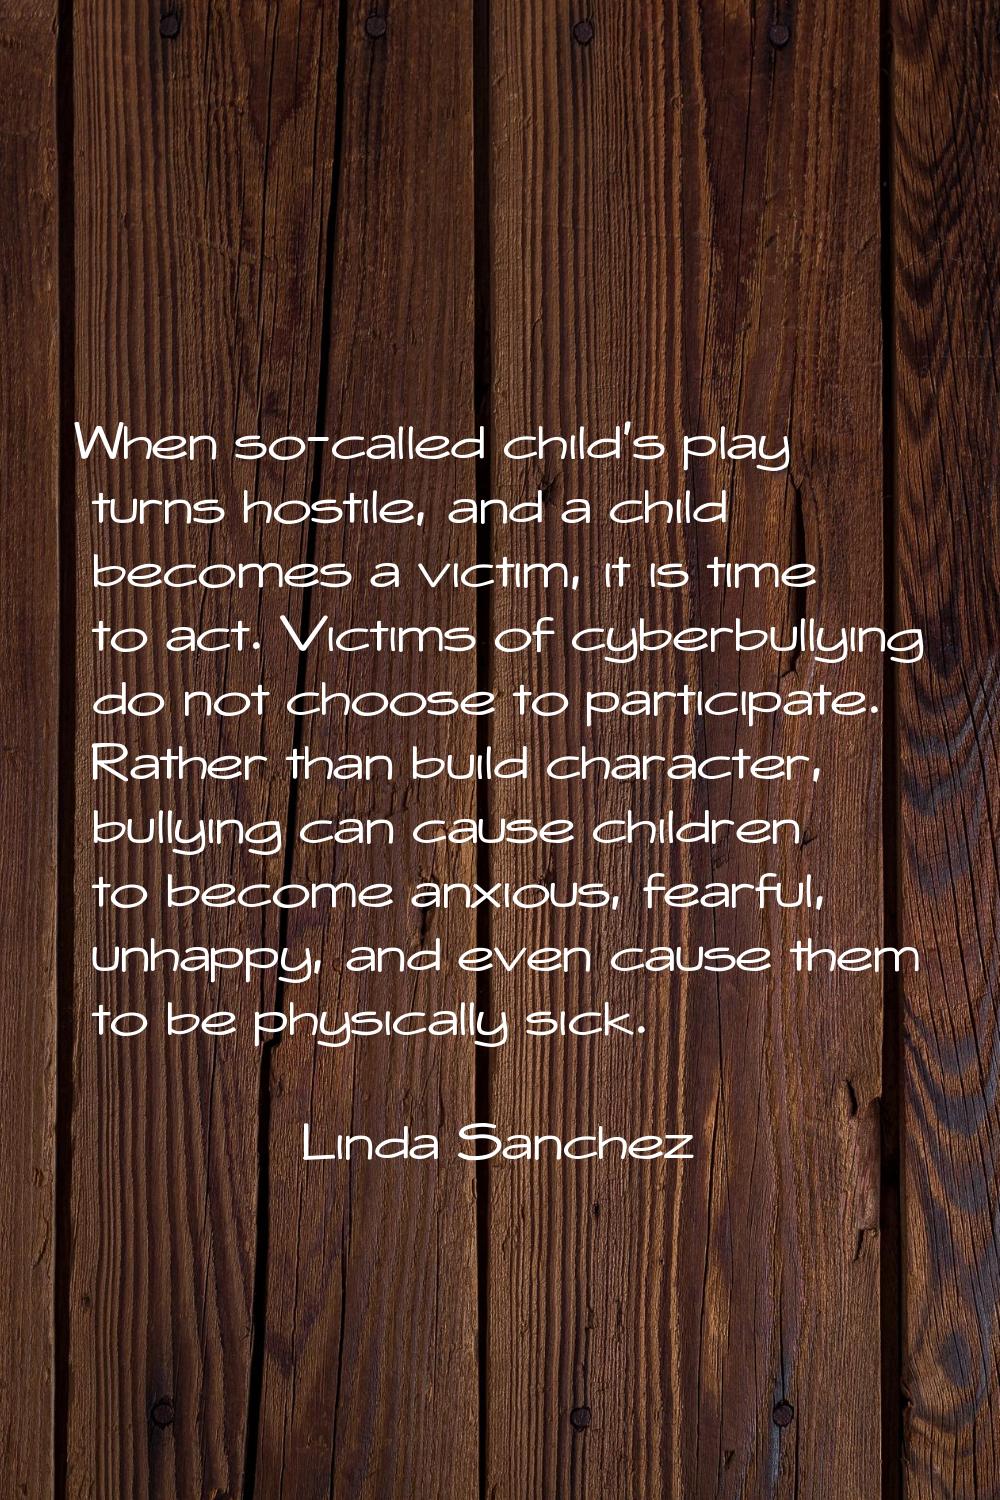 When so-called child's play turns hostile, and a child becomes a victim, it is time to act. Victims